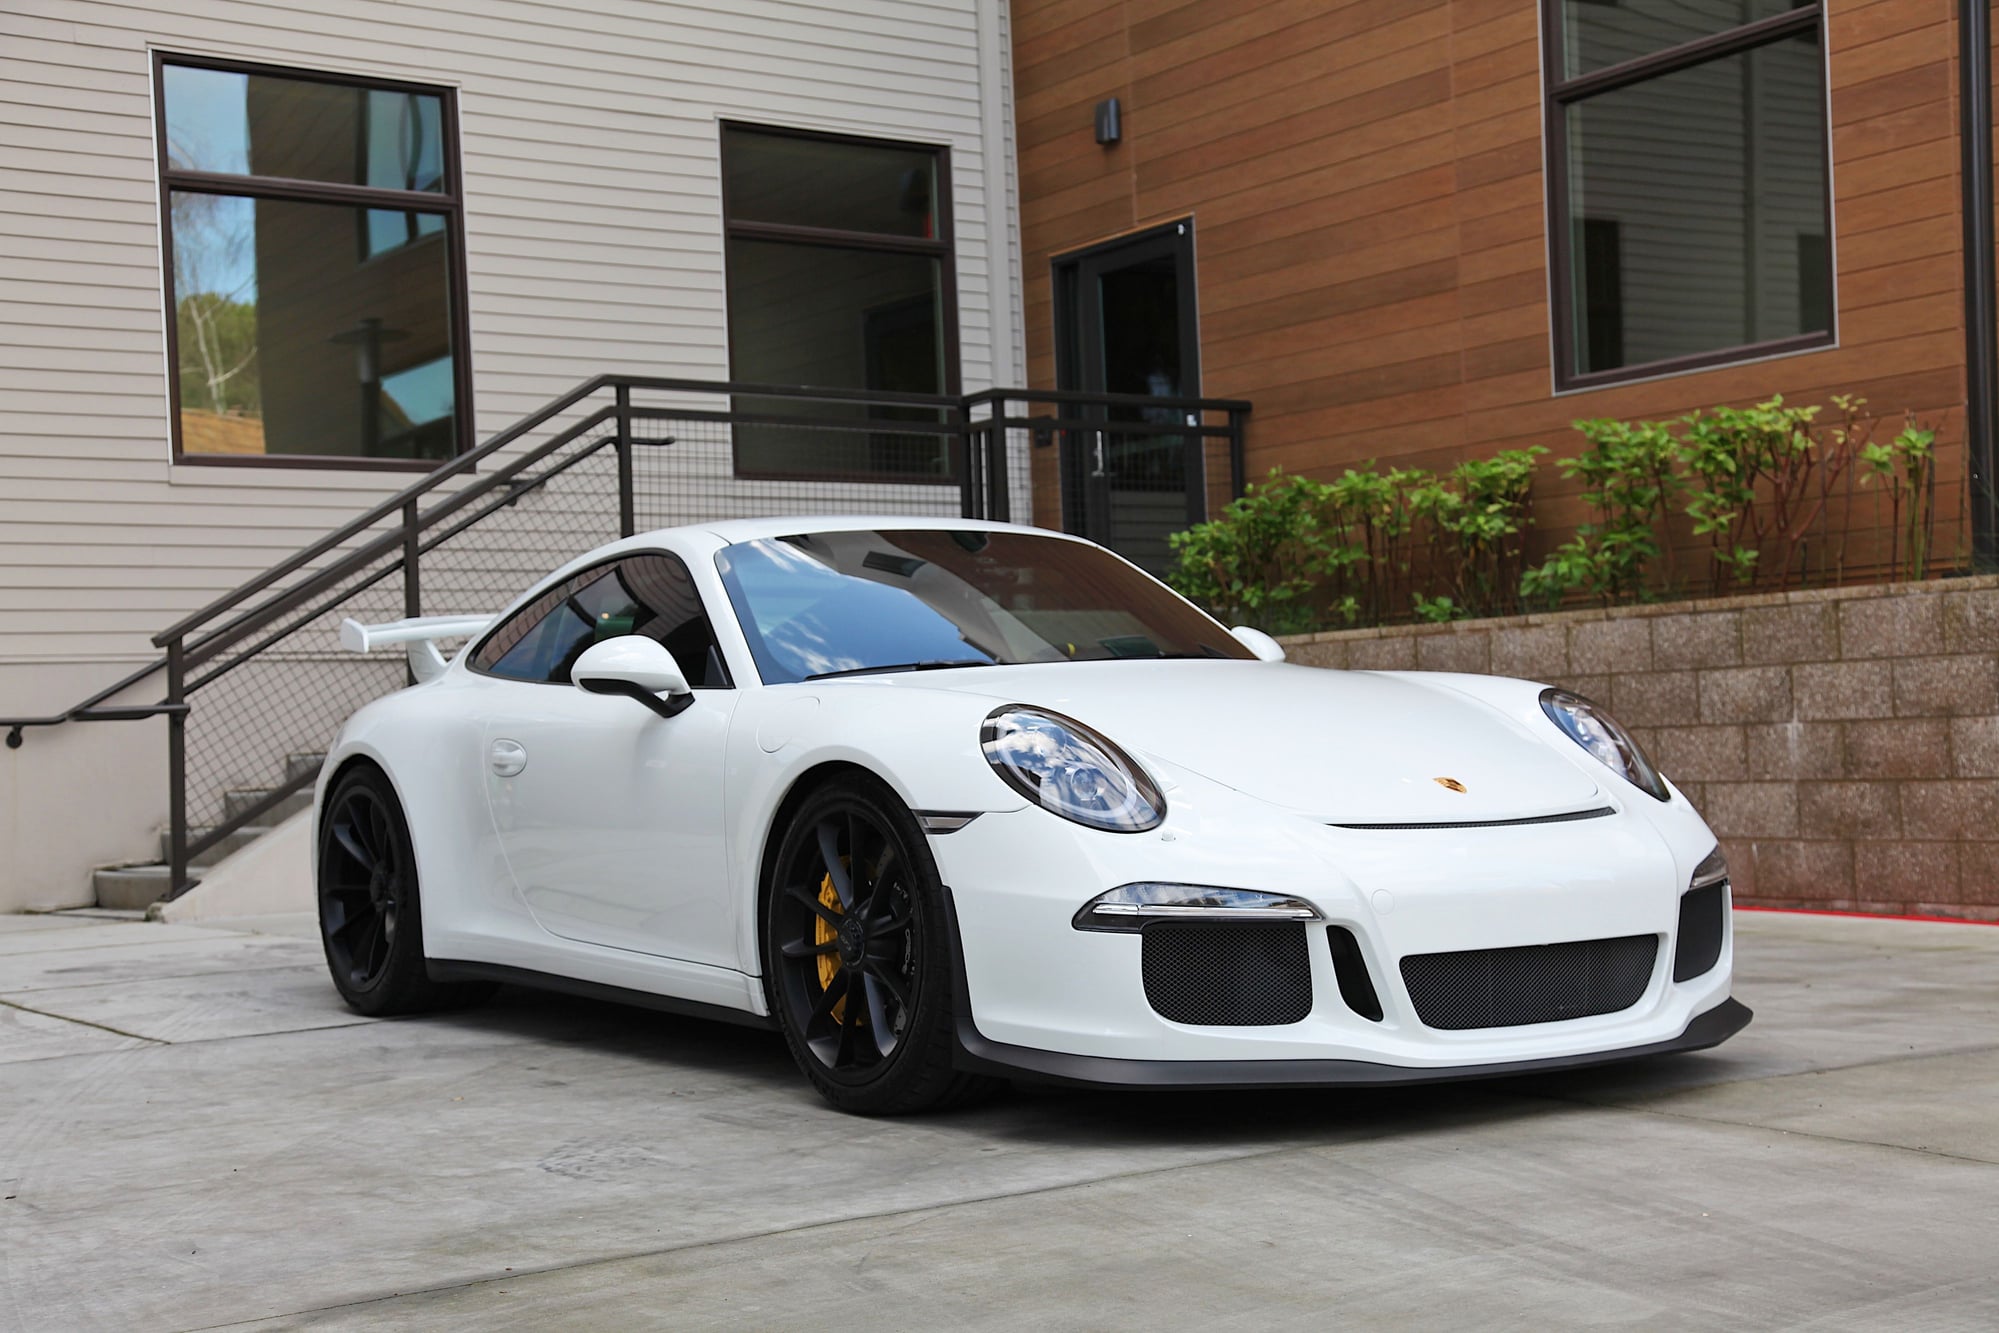 2016 Porsche GT3 - FS: 2016 911 GT3: $172K MSRP + $13K adds, White, LWB, PCCB, Lift, Full XPEL, Pepita - Used - VIN WP0AC2A94GS184099 - 7,569 Miles - 6 cyl - 2WD - Automatic - Coupe - White - Norcal, CA 94043, United States